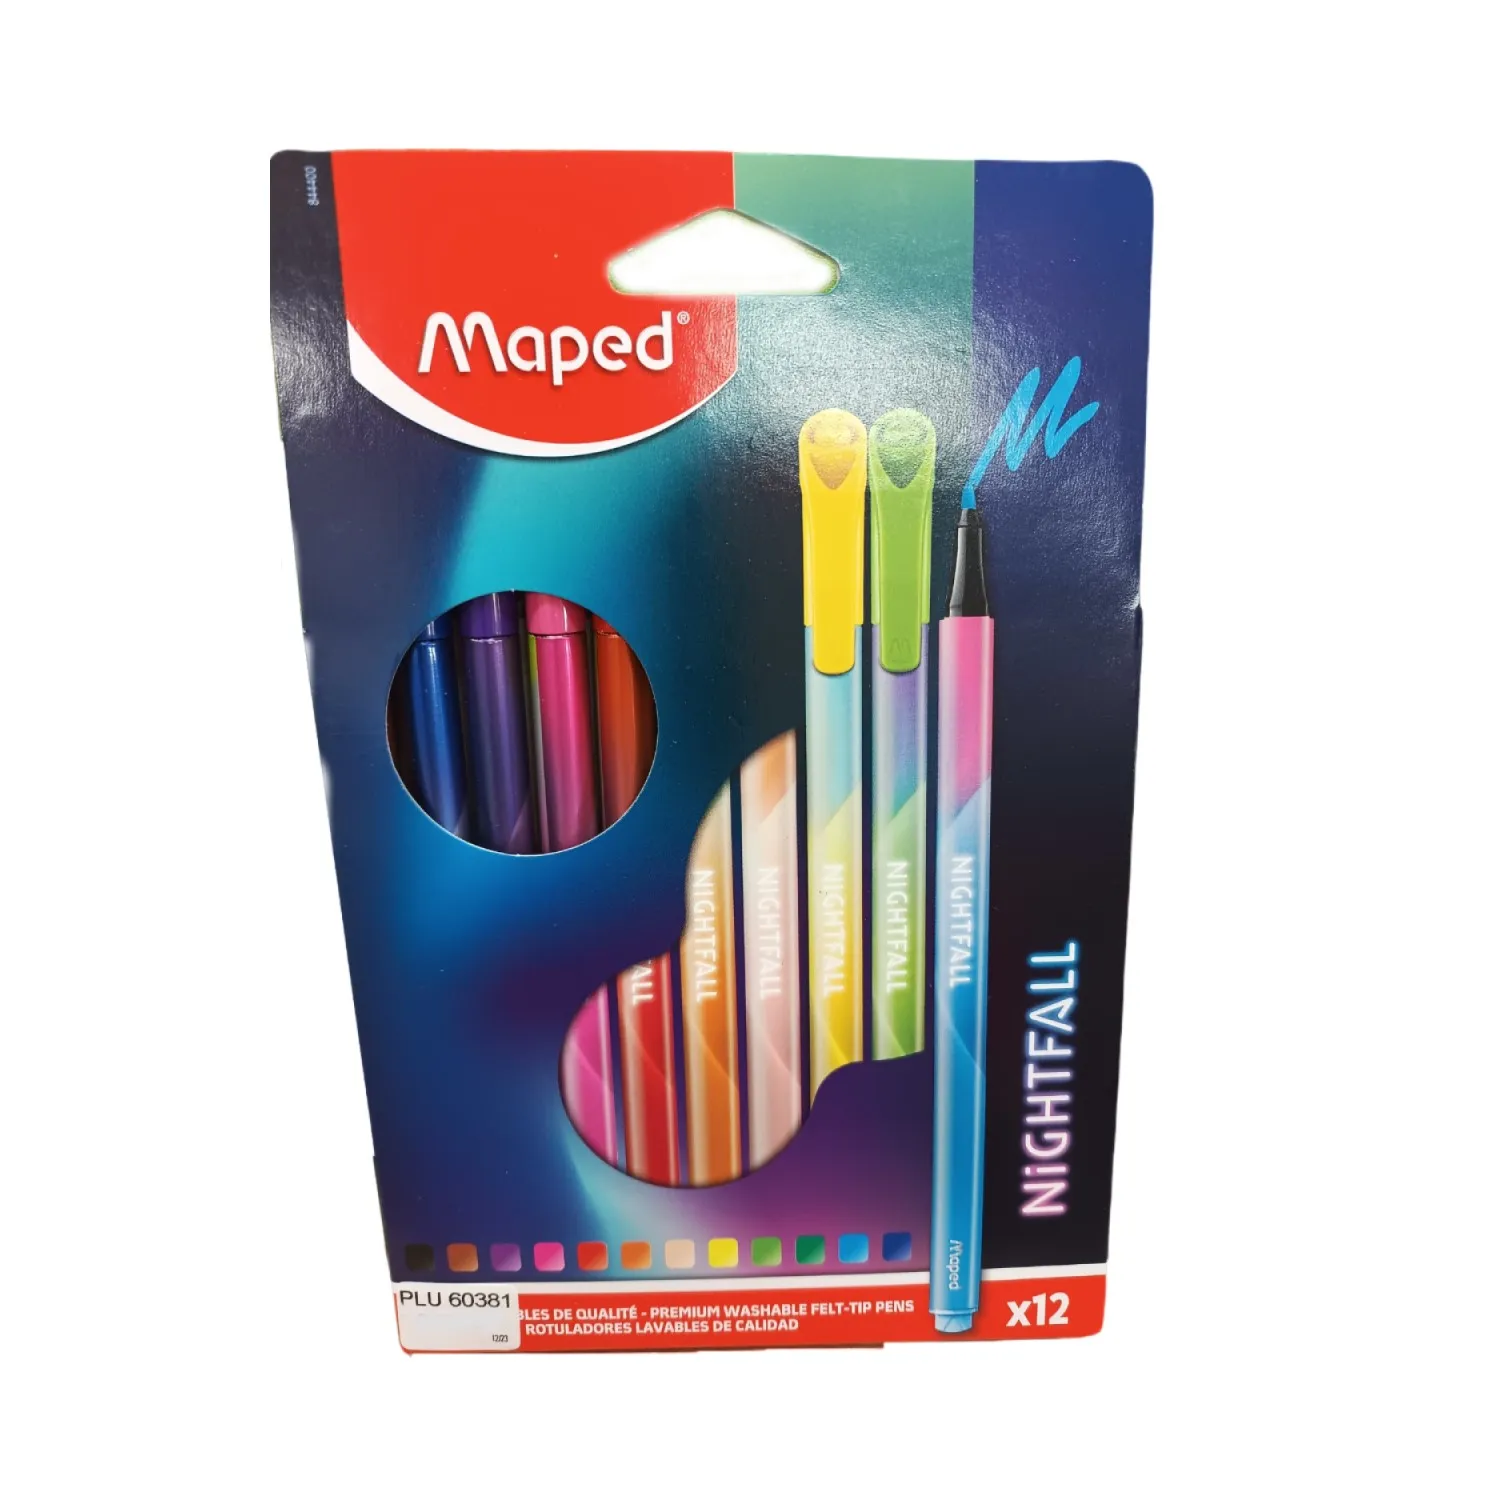 Colores Faber Castell SuperSoft Set 50 Uds 120750SOFT - Yhappa